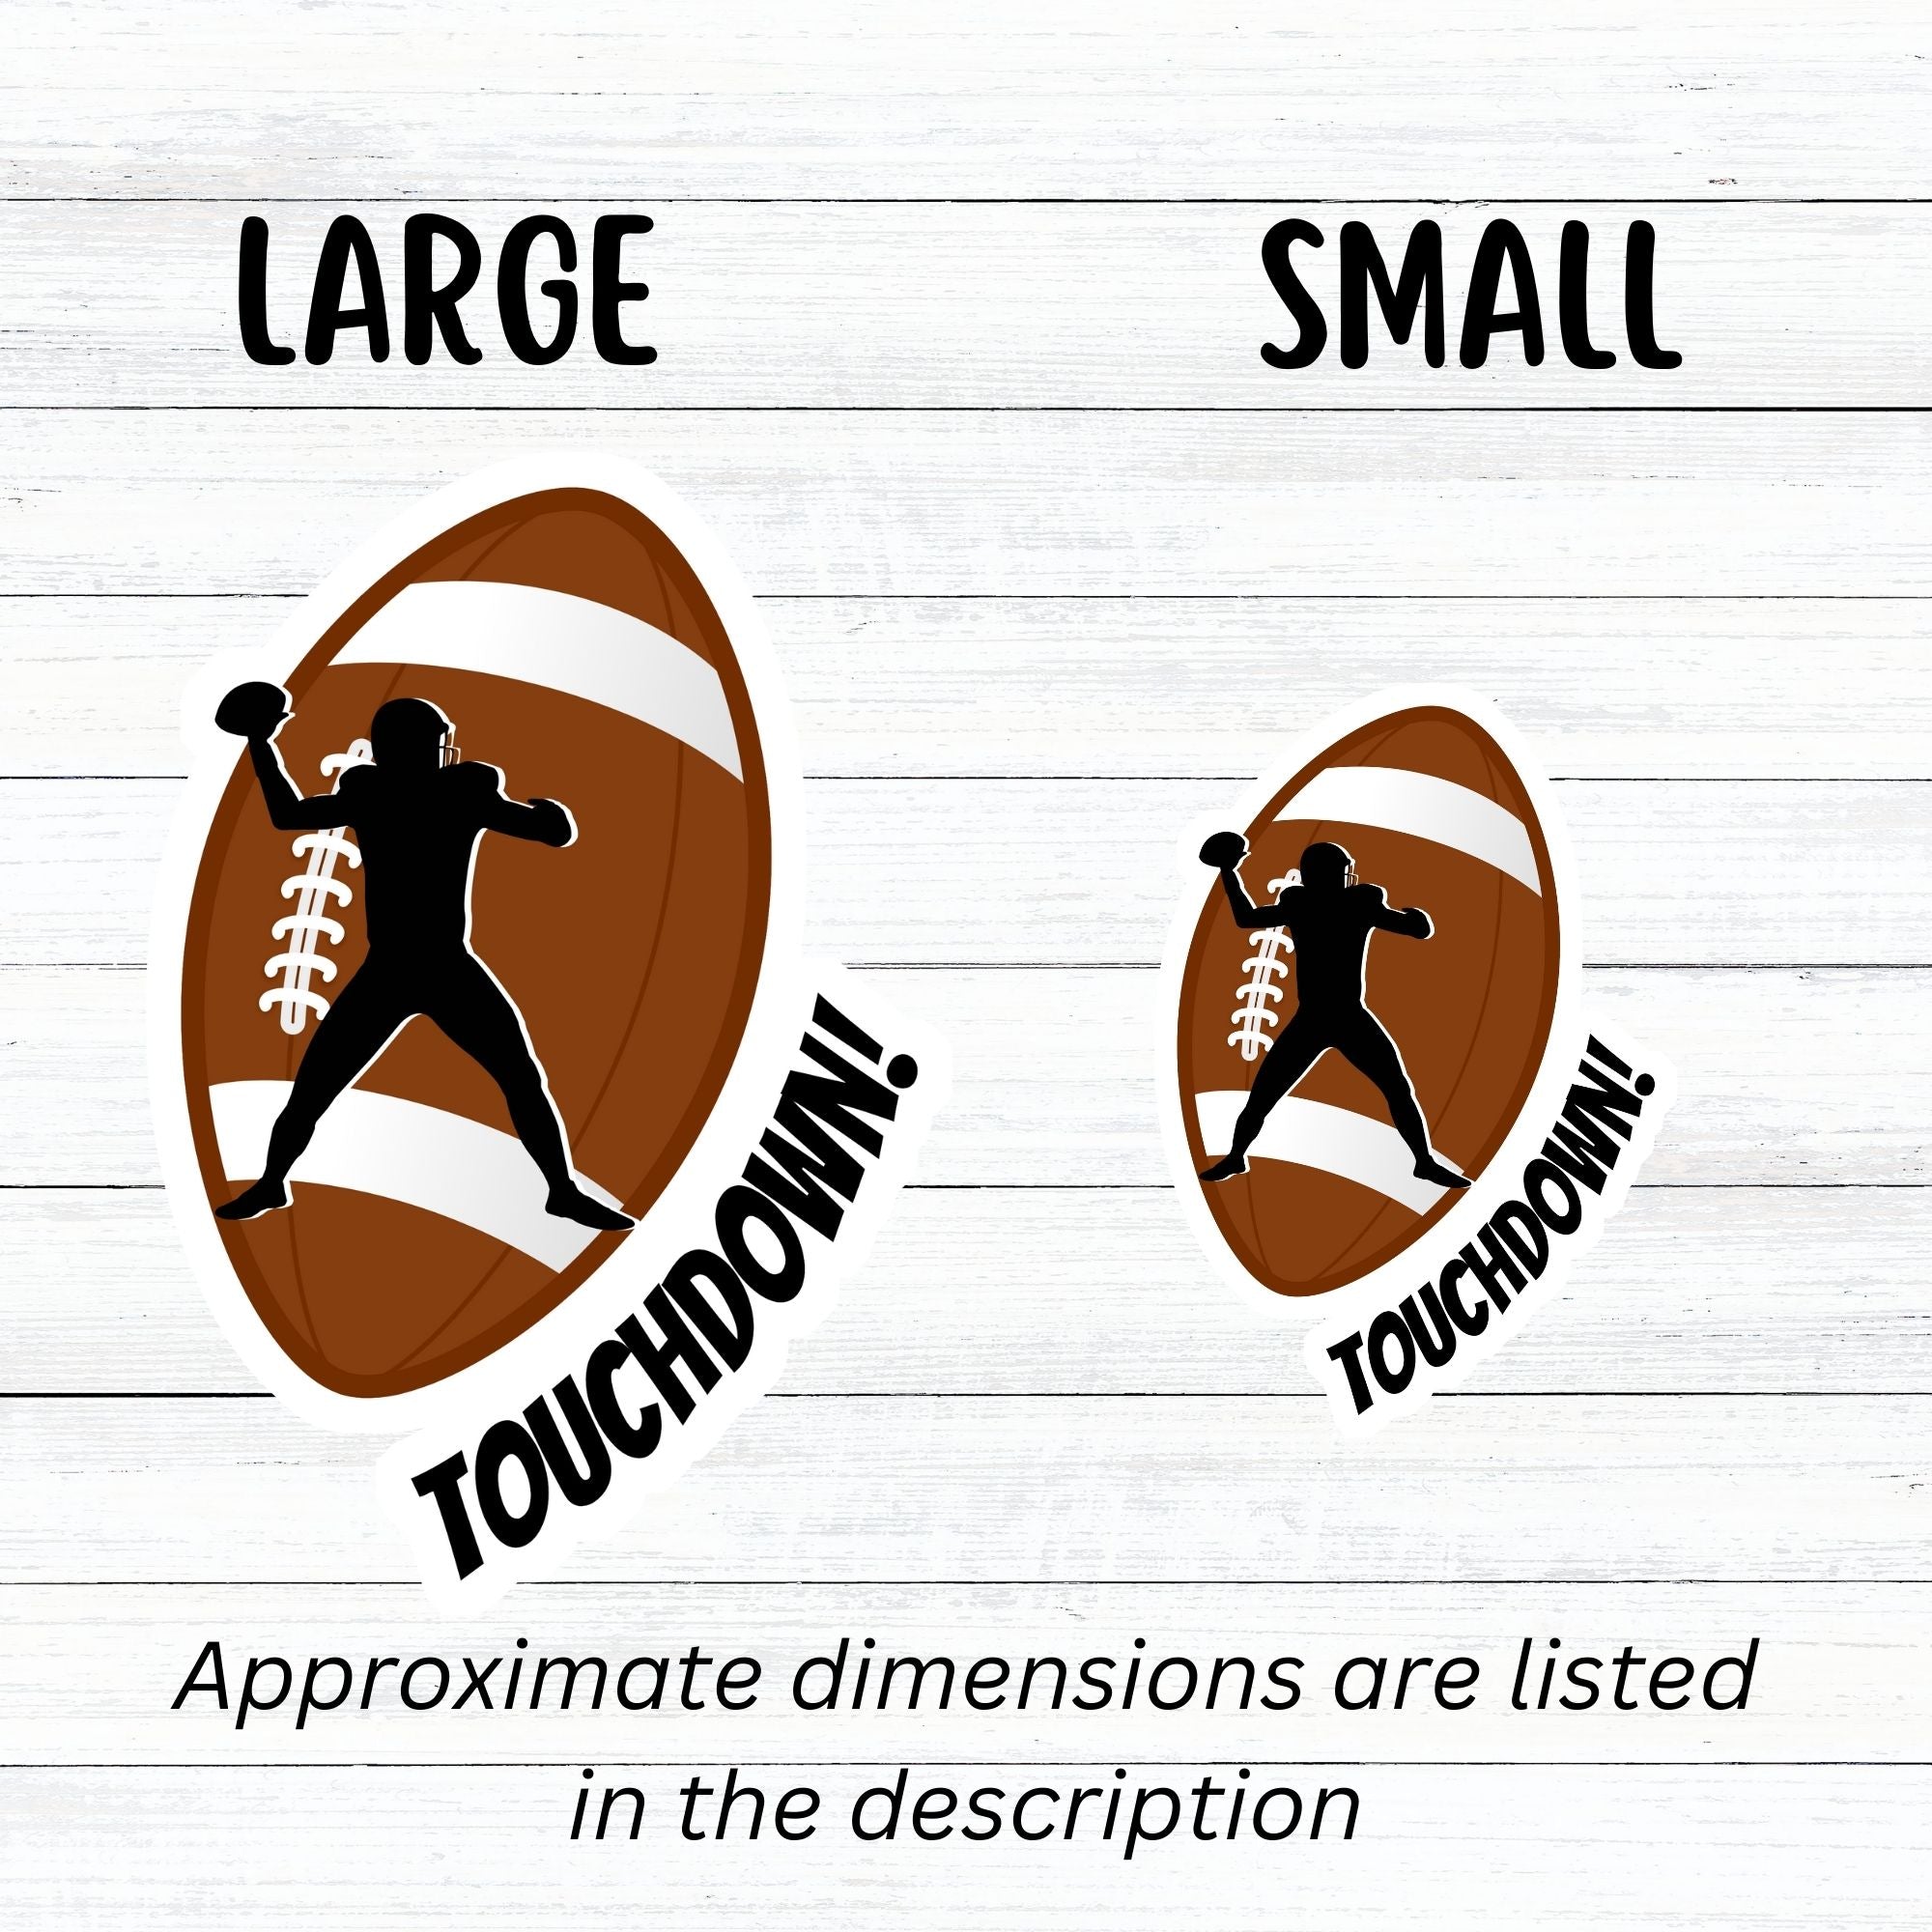 This individual die-cut sticker features the silhouette of a football (American) player about to pass the ball, on a football background, with the word "Touchdown!" on the lower right side. This image shows the large and small touchdown stickers next to each other.